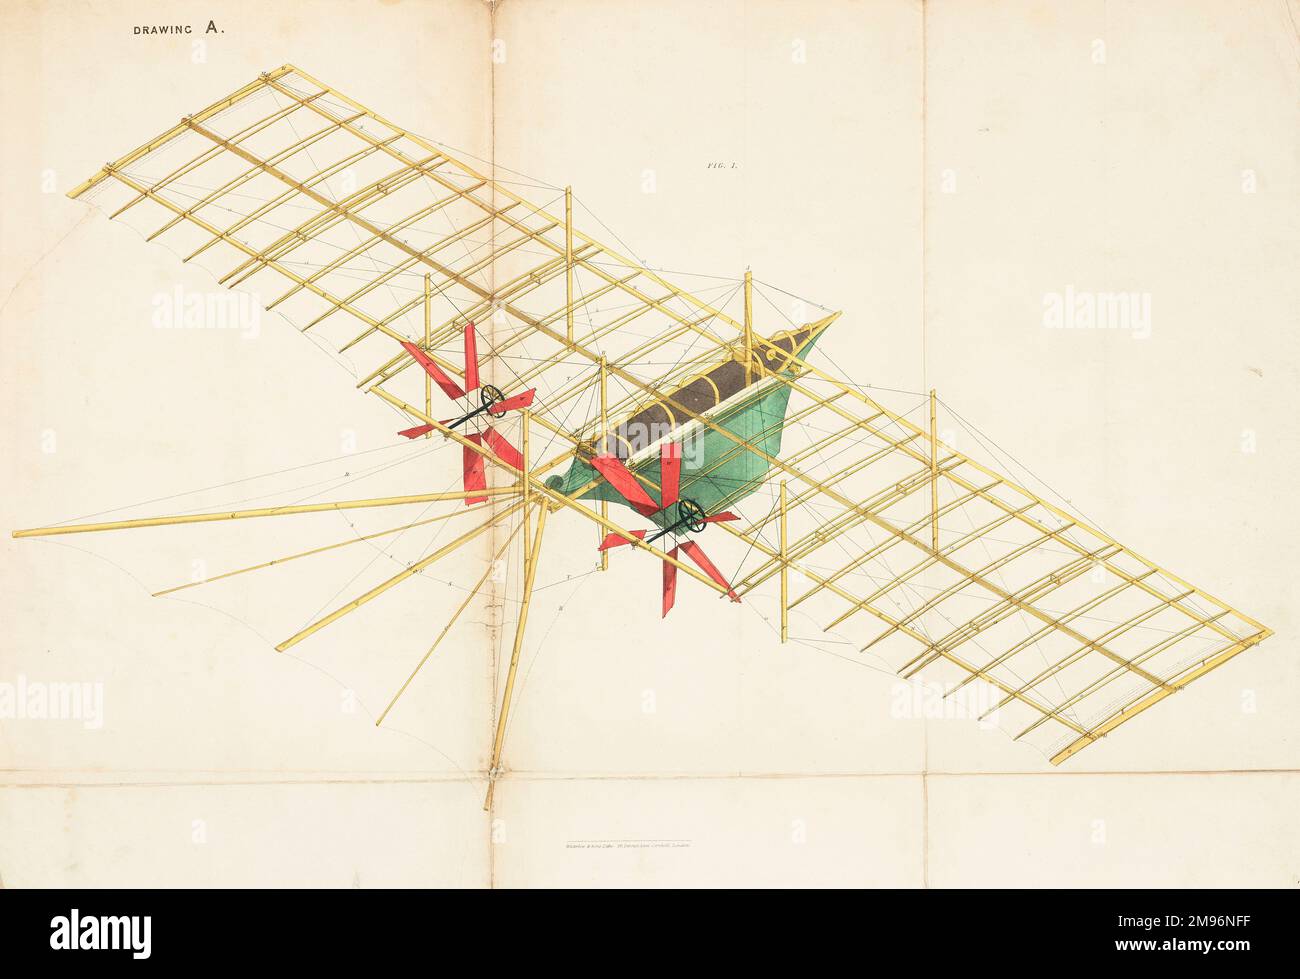 The Aerial Steam Carriage -- view with covering fabric removed.  This flying machine was patented by William Samuel Henson (1812-1888) and John Stringfellow (1799-1883) in 1842. Stock Photo